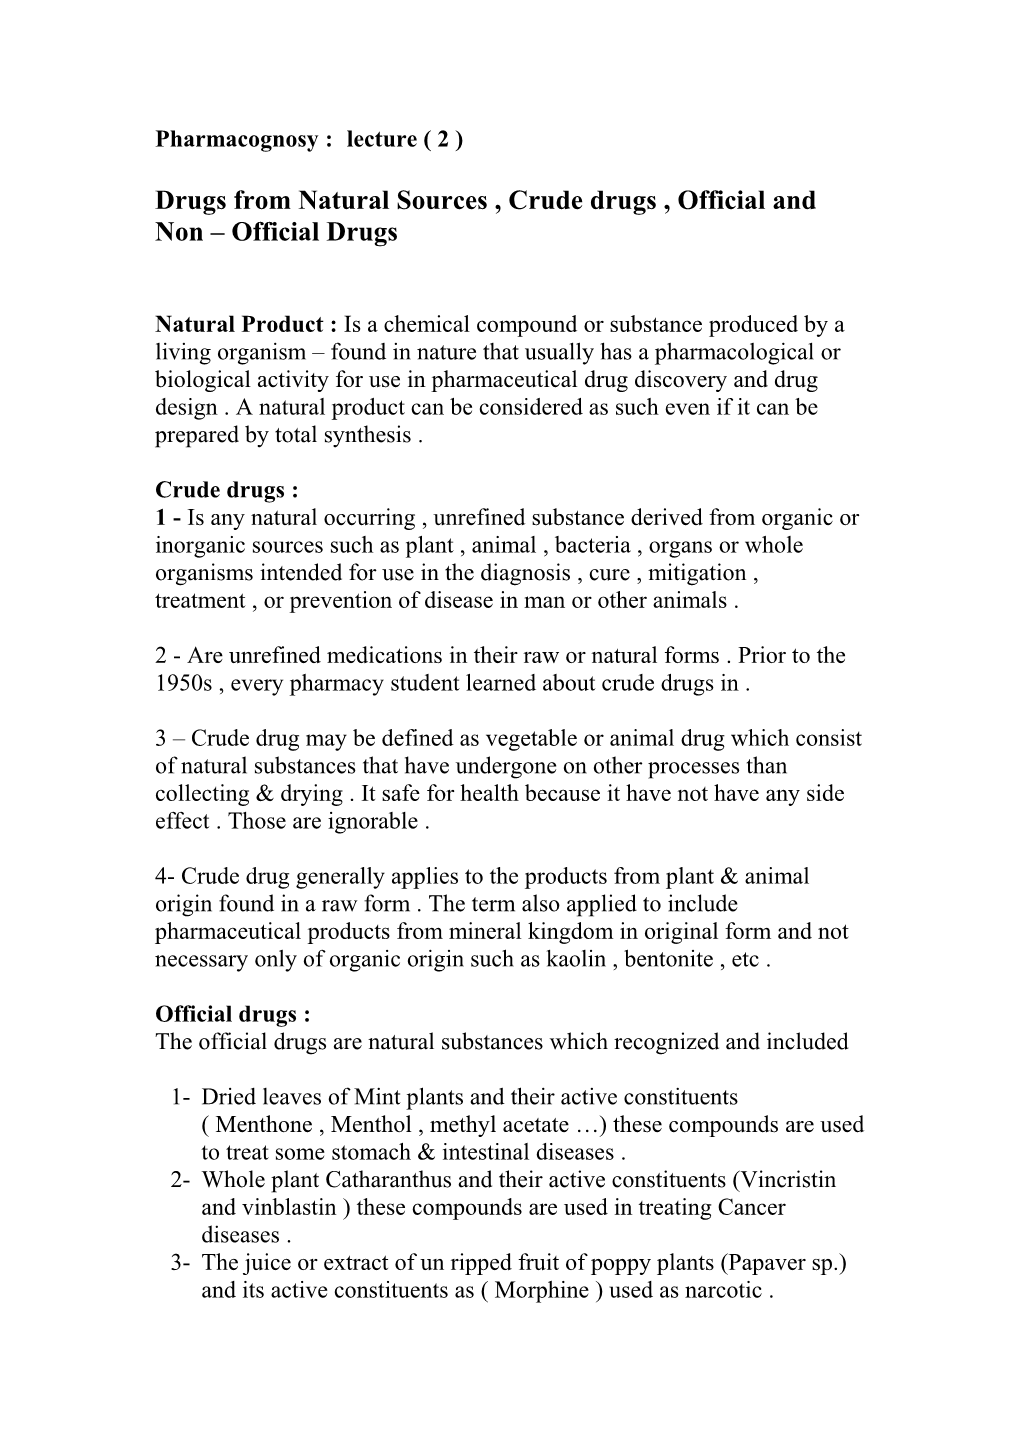 Drugs From Natural Sources , Crude Drugs , Official And Non – Official Drugs